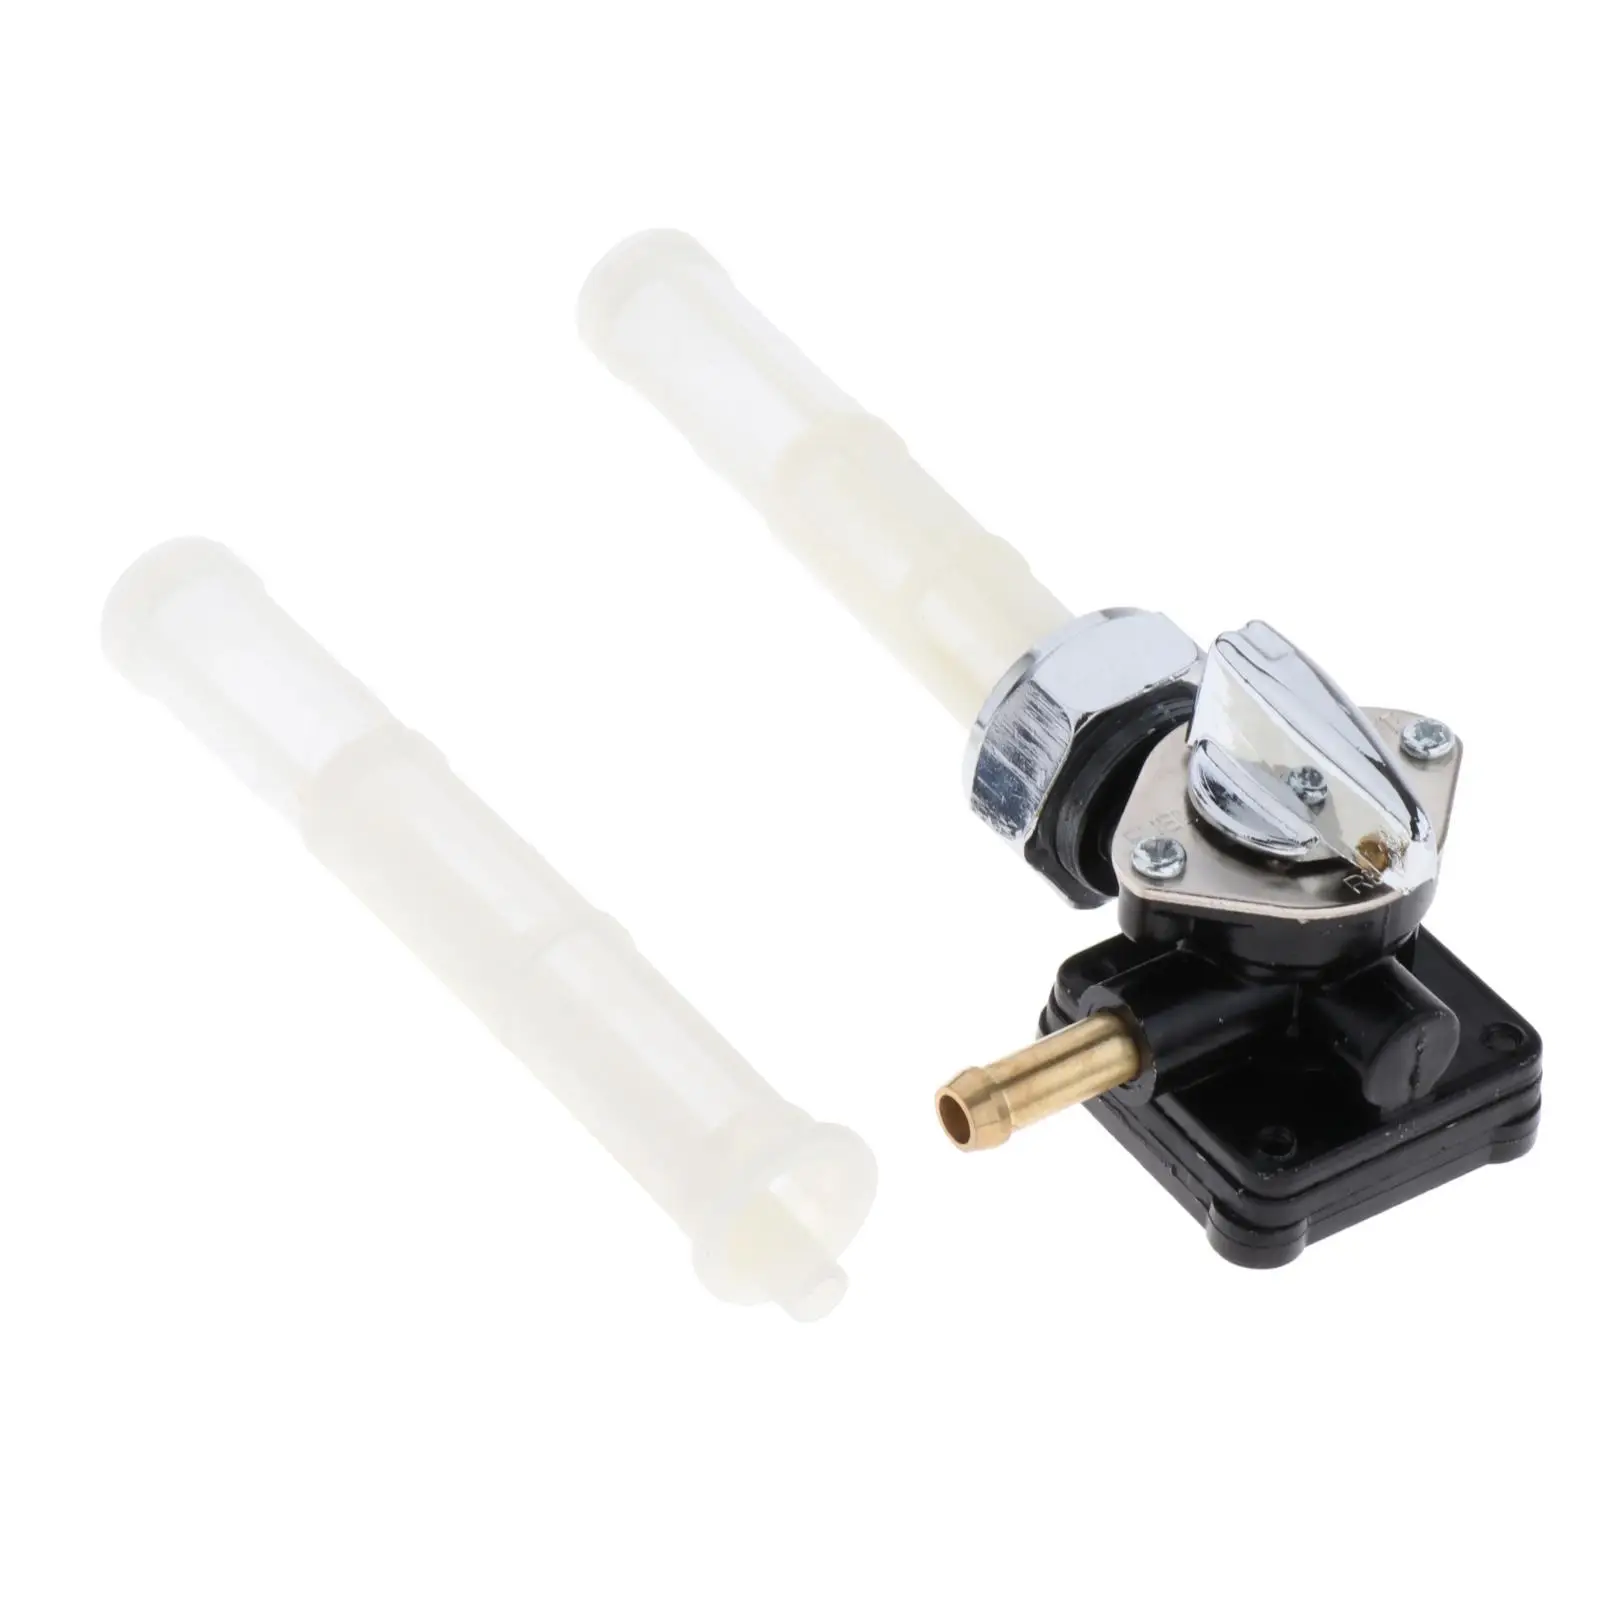 Fuel Switch Valve Petcock with Filter Mesh Strong Gas Shut Off Switch for Flst Fxst Fxd Replacement Motorbike Accessory